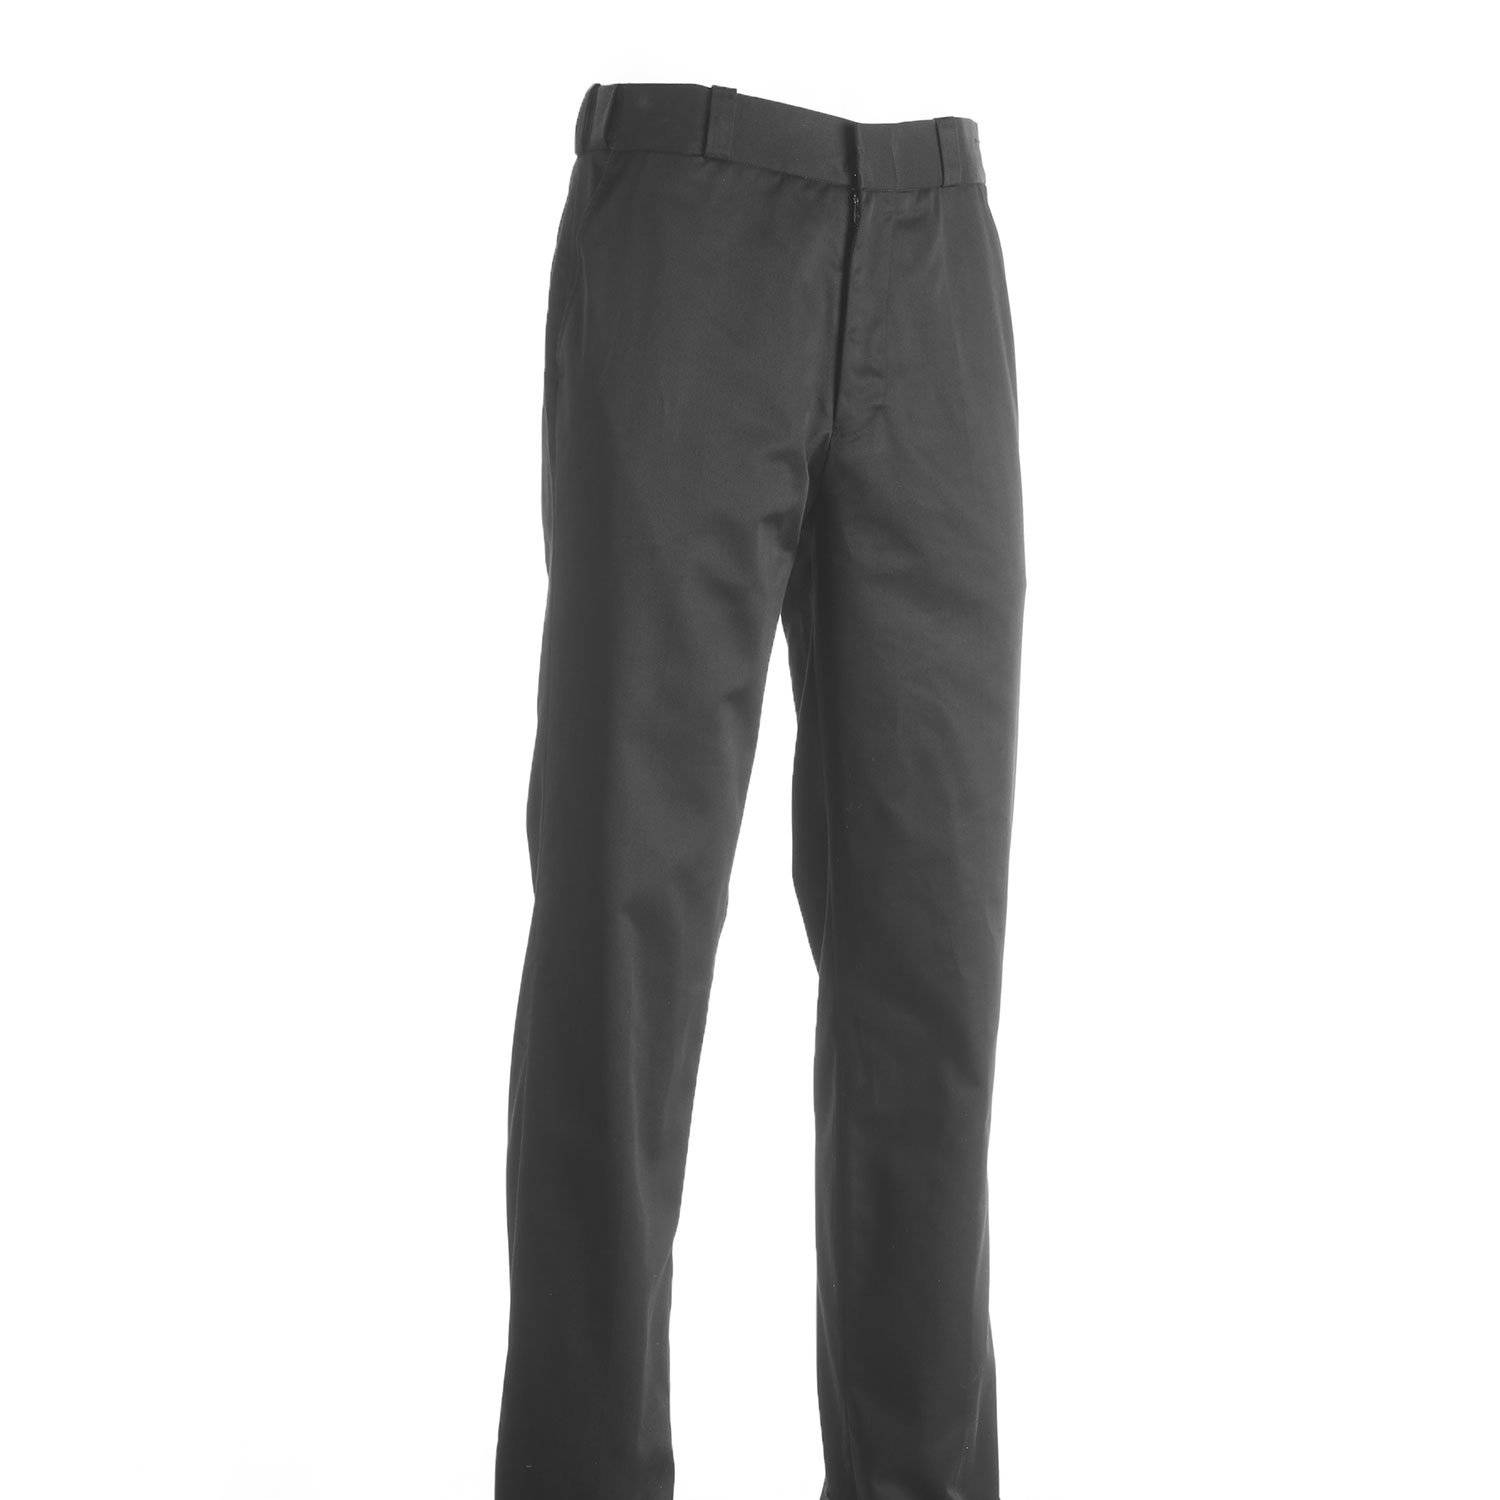 TACT SQUAD POLY/COTTON COMFORT WAIST TROUSER